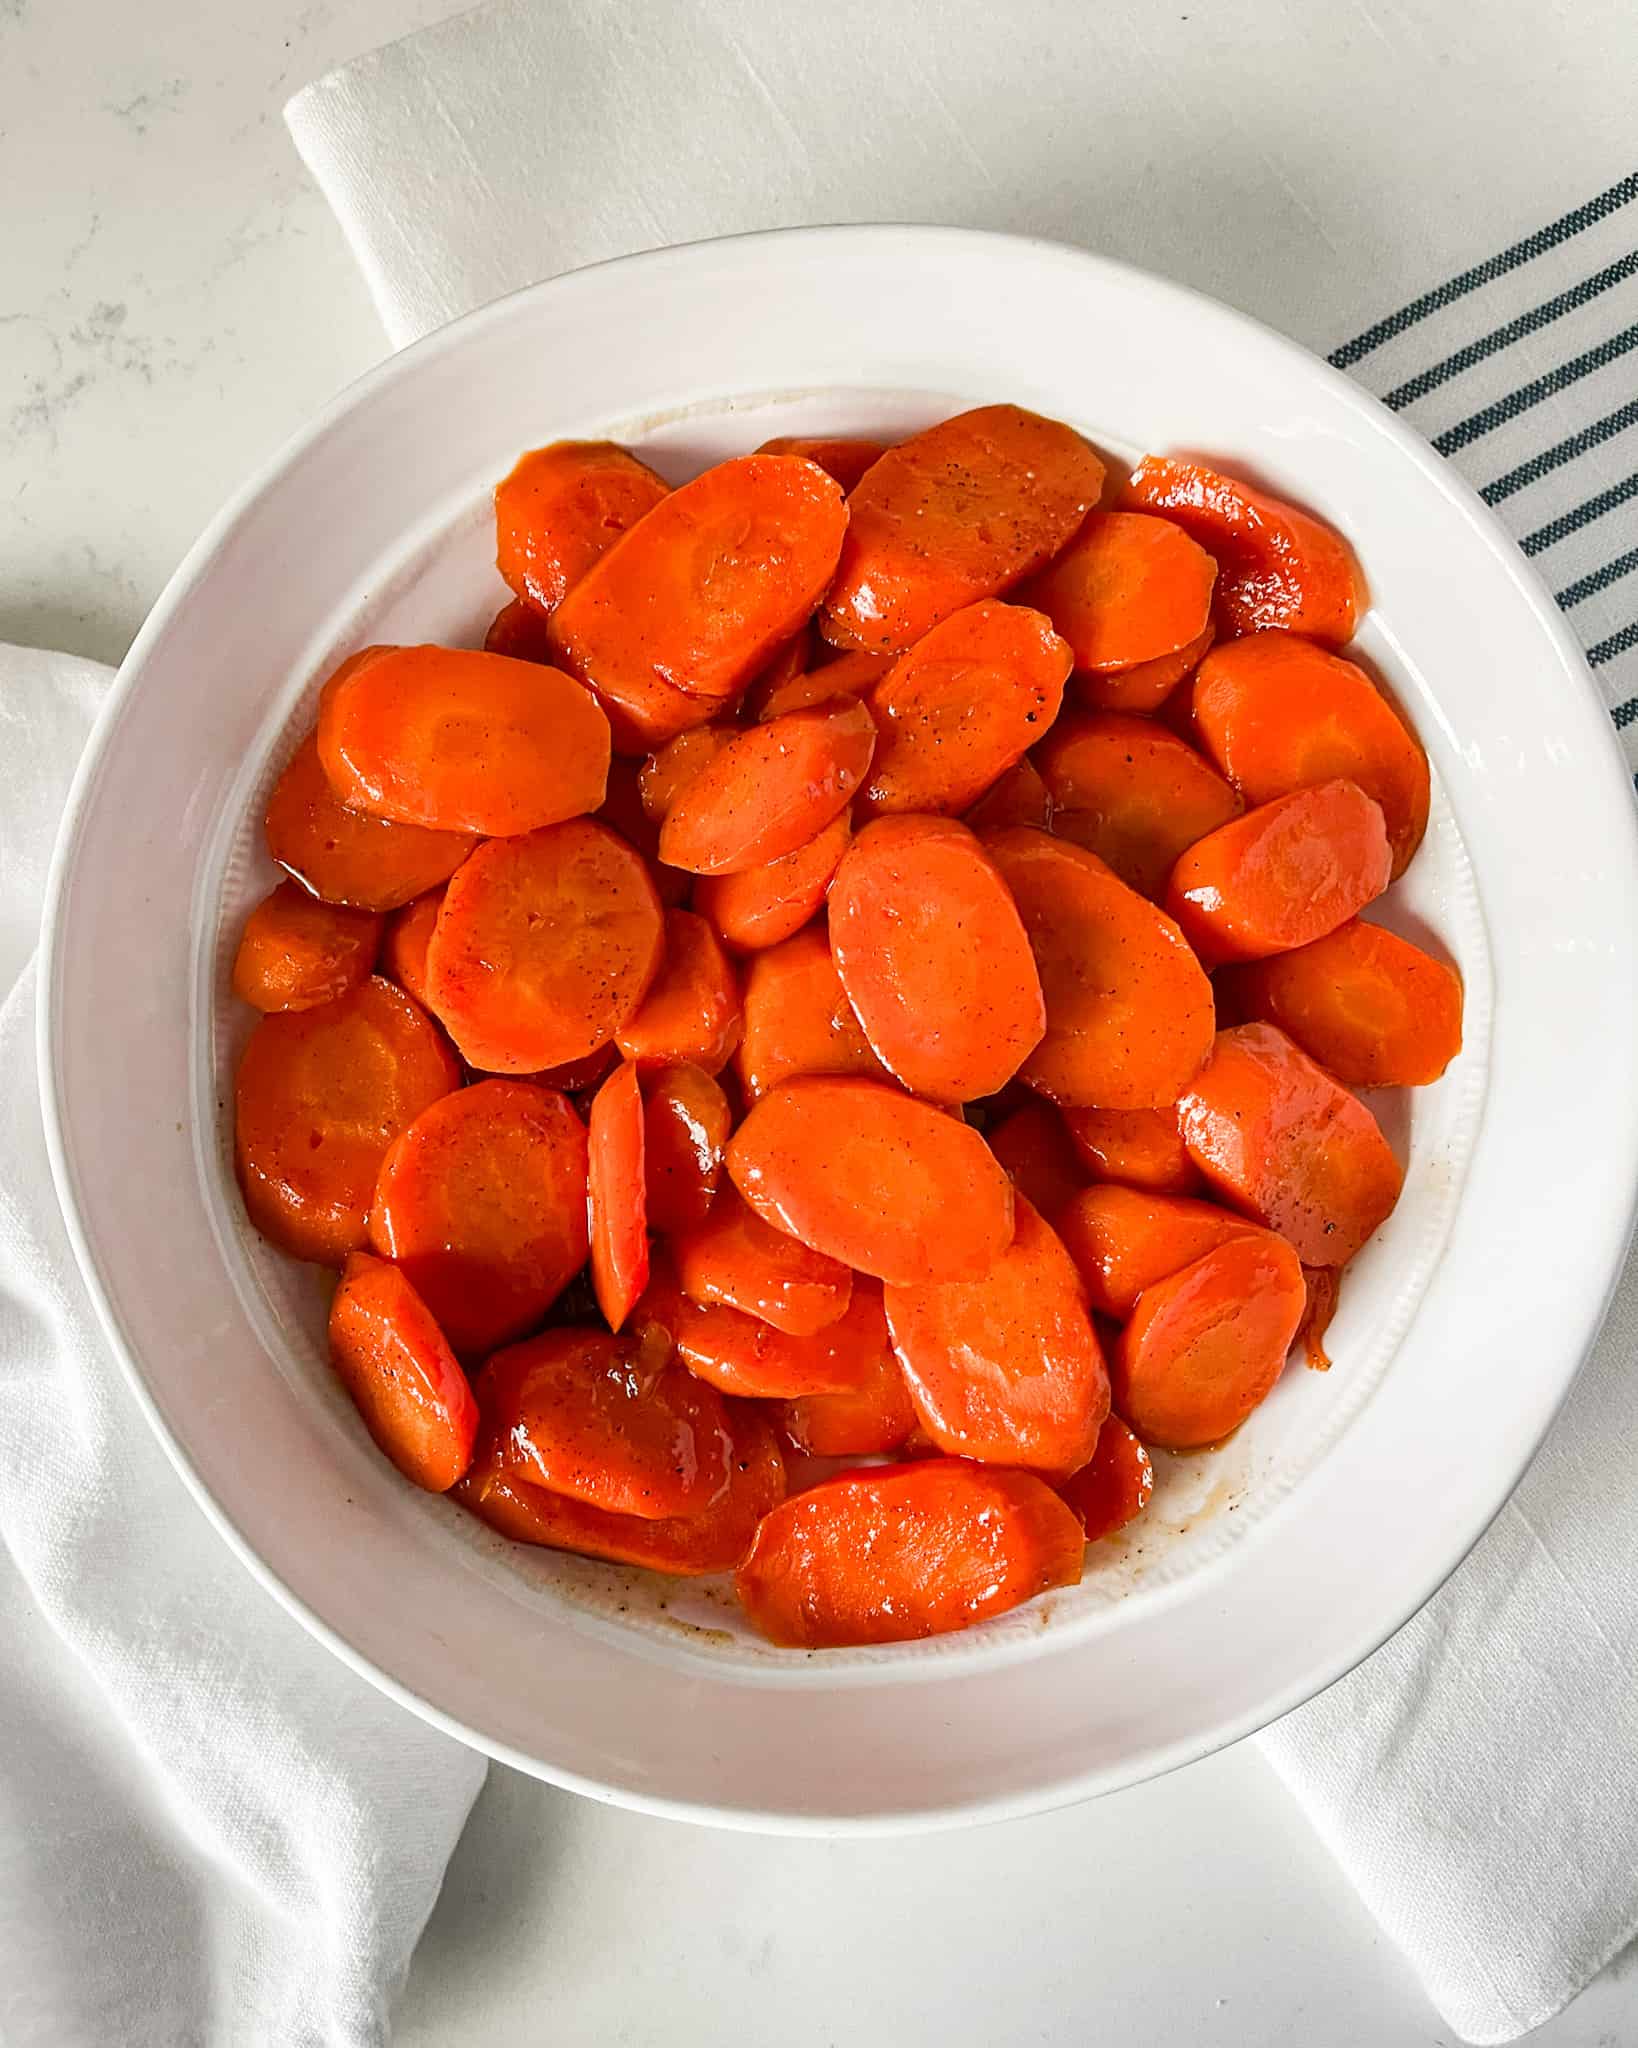 Glazed carrots in a white serving dish.